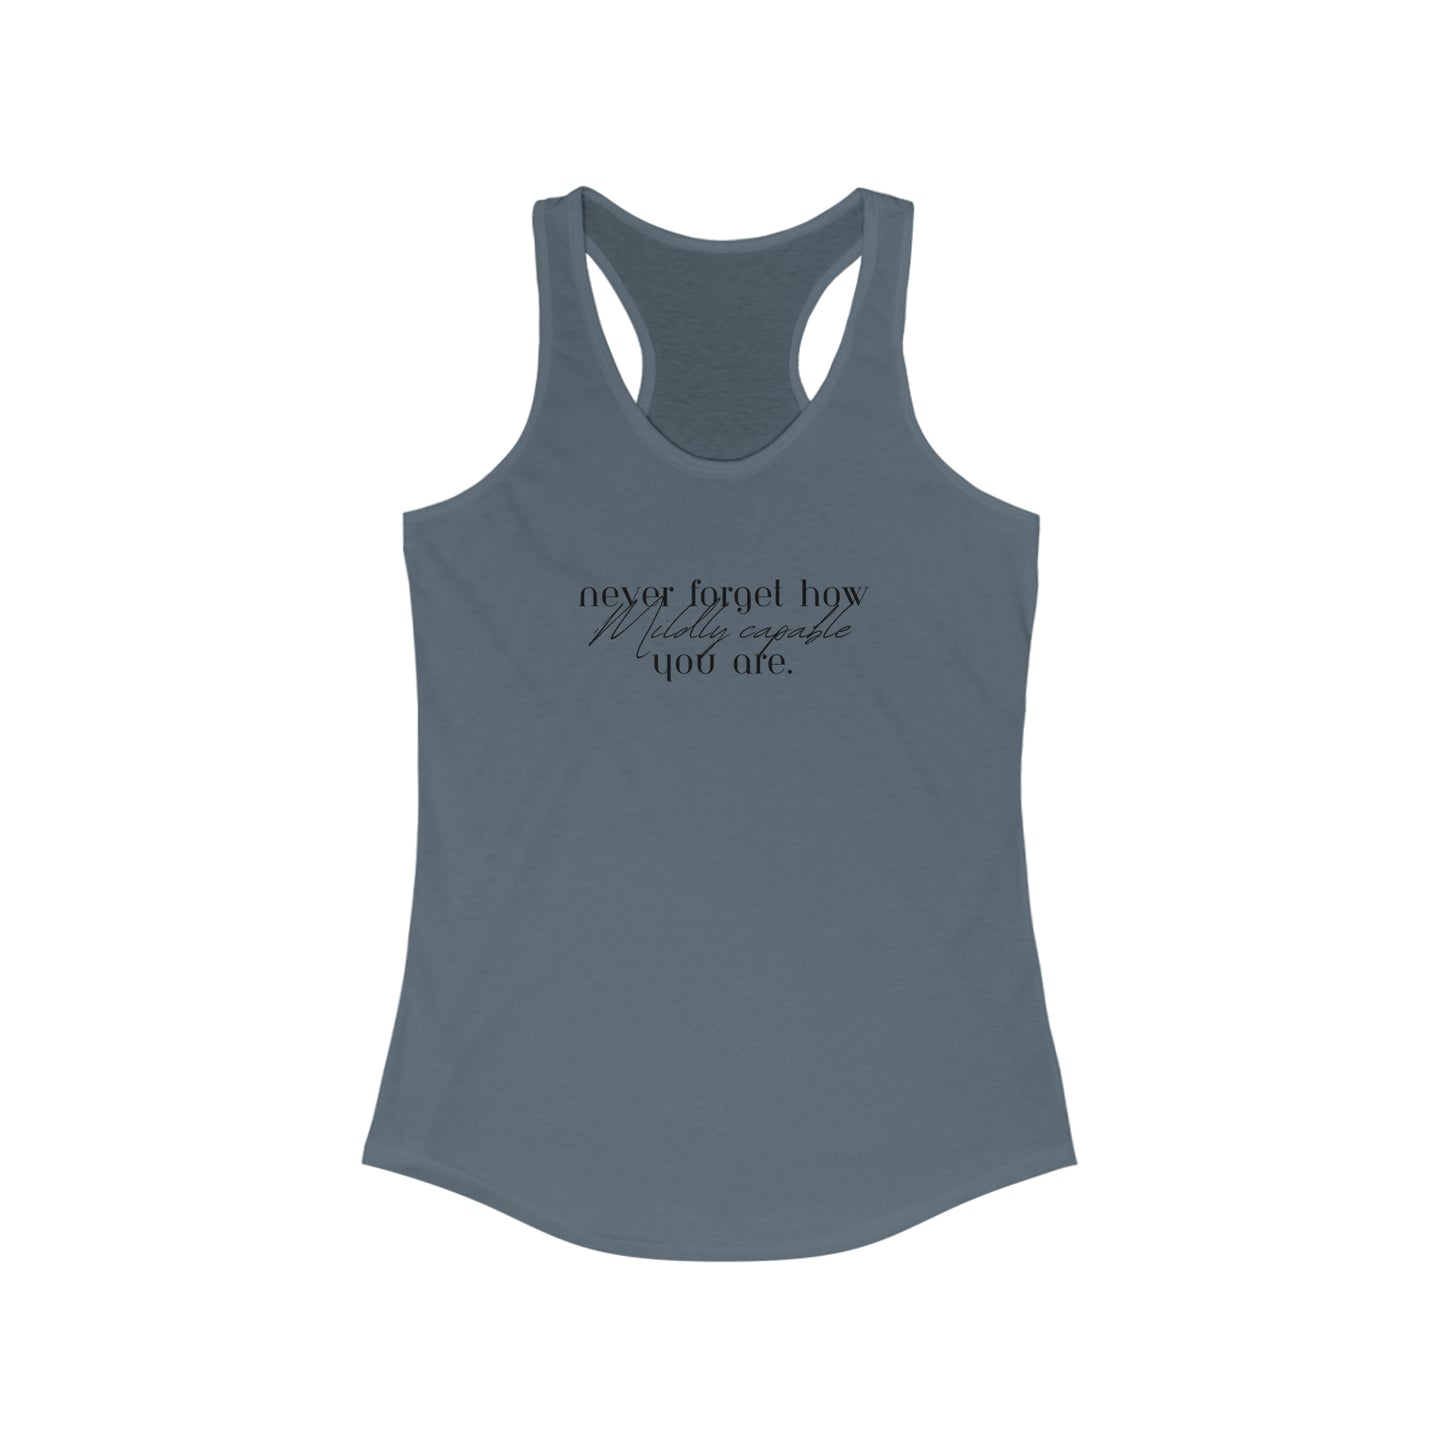 Trust Yourself You Got This Racerback Tank